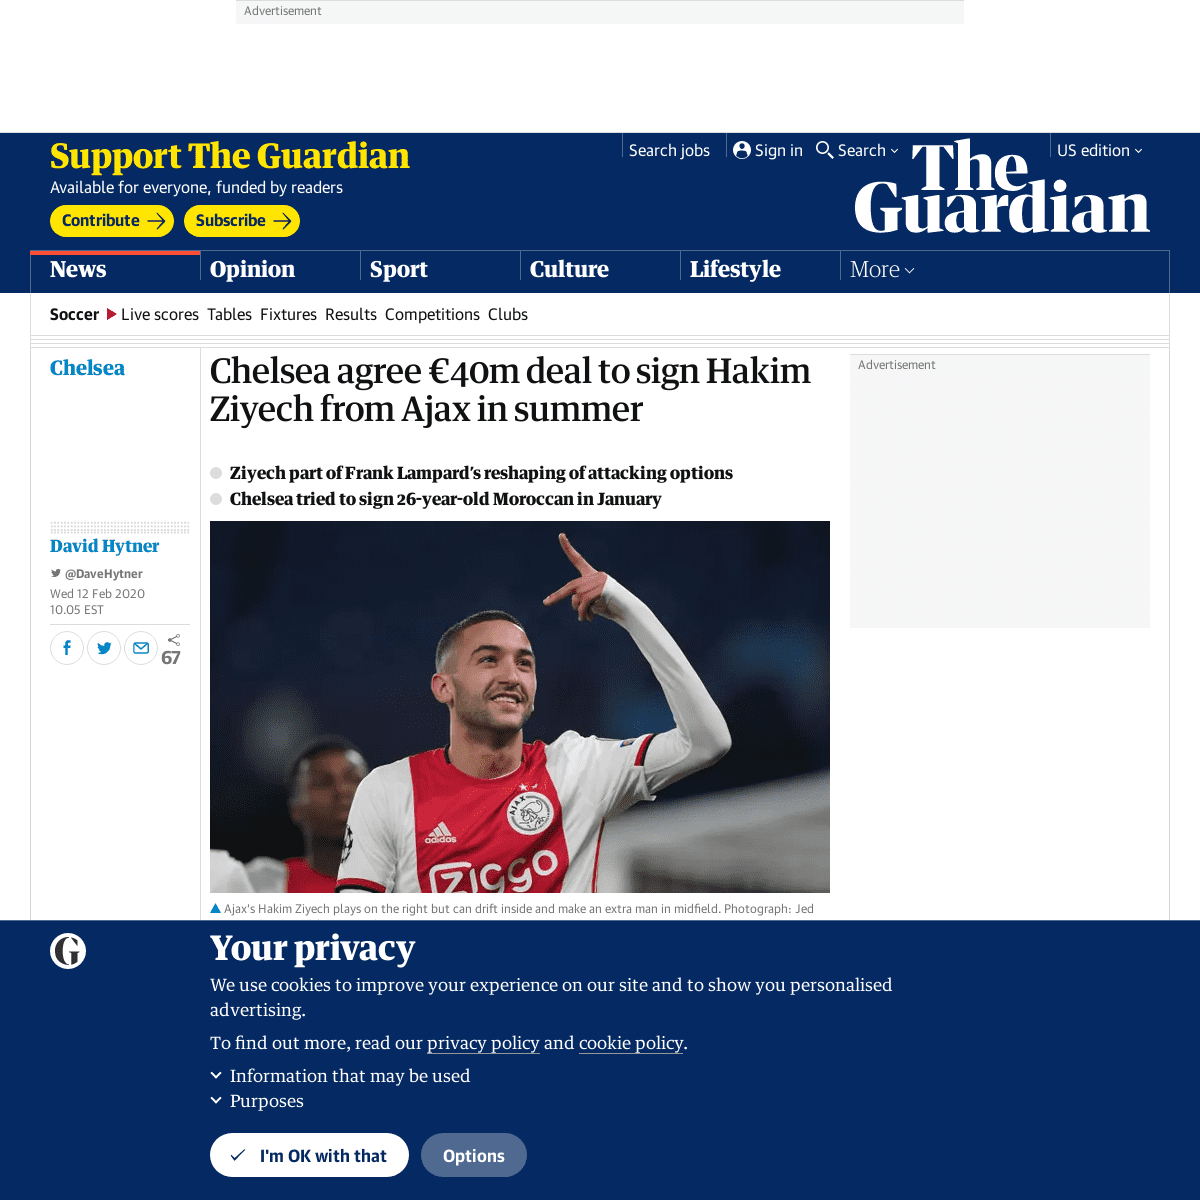 A complete backup of www.theguardian.com/football/2020/feb/12/chelsea-agree-40m-deal-to-sign-hakim-ziyech-from-ajax-in-summer